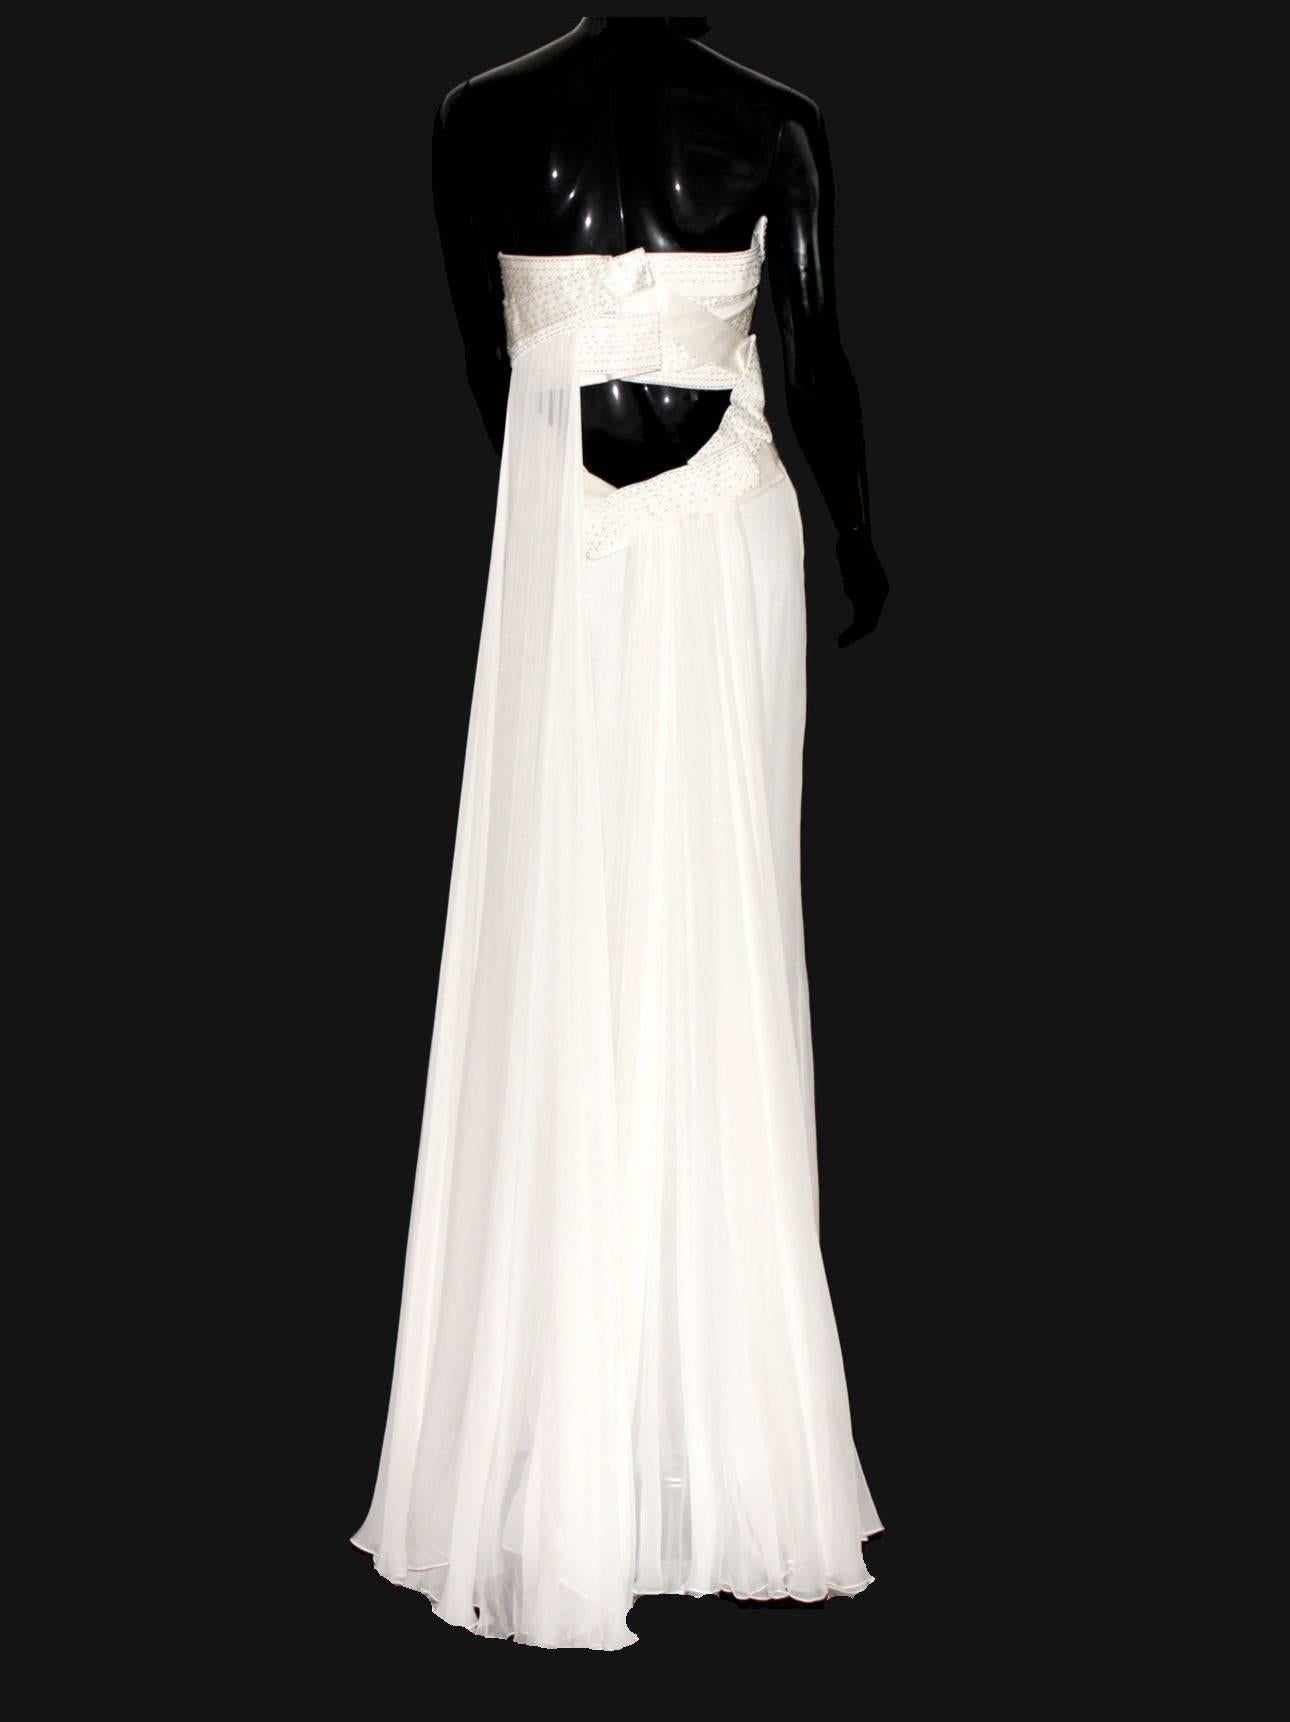 Amazing VERSACE Strapless Beaded Goddess Evening Wedding Bridal Gown Dress 42 In Good Condition For Sale In Switzerland, CH